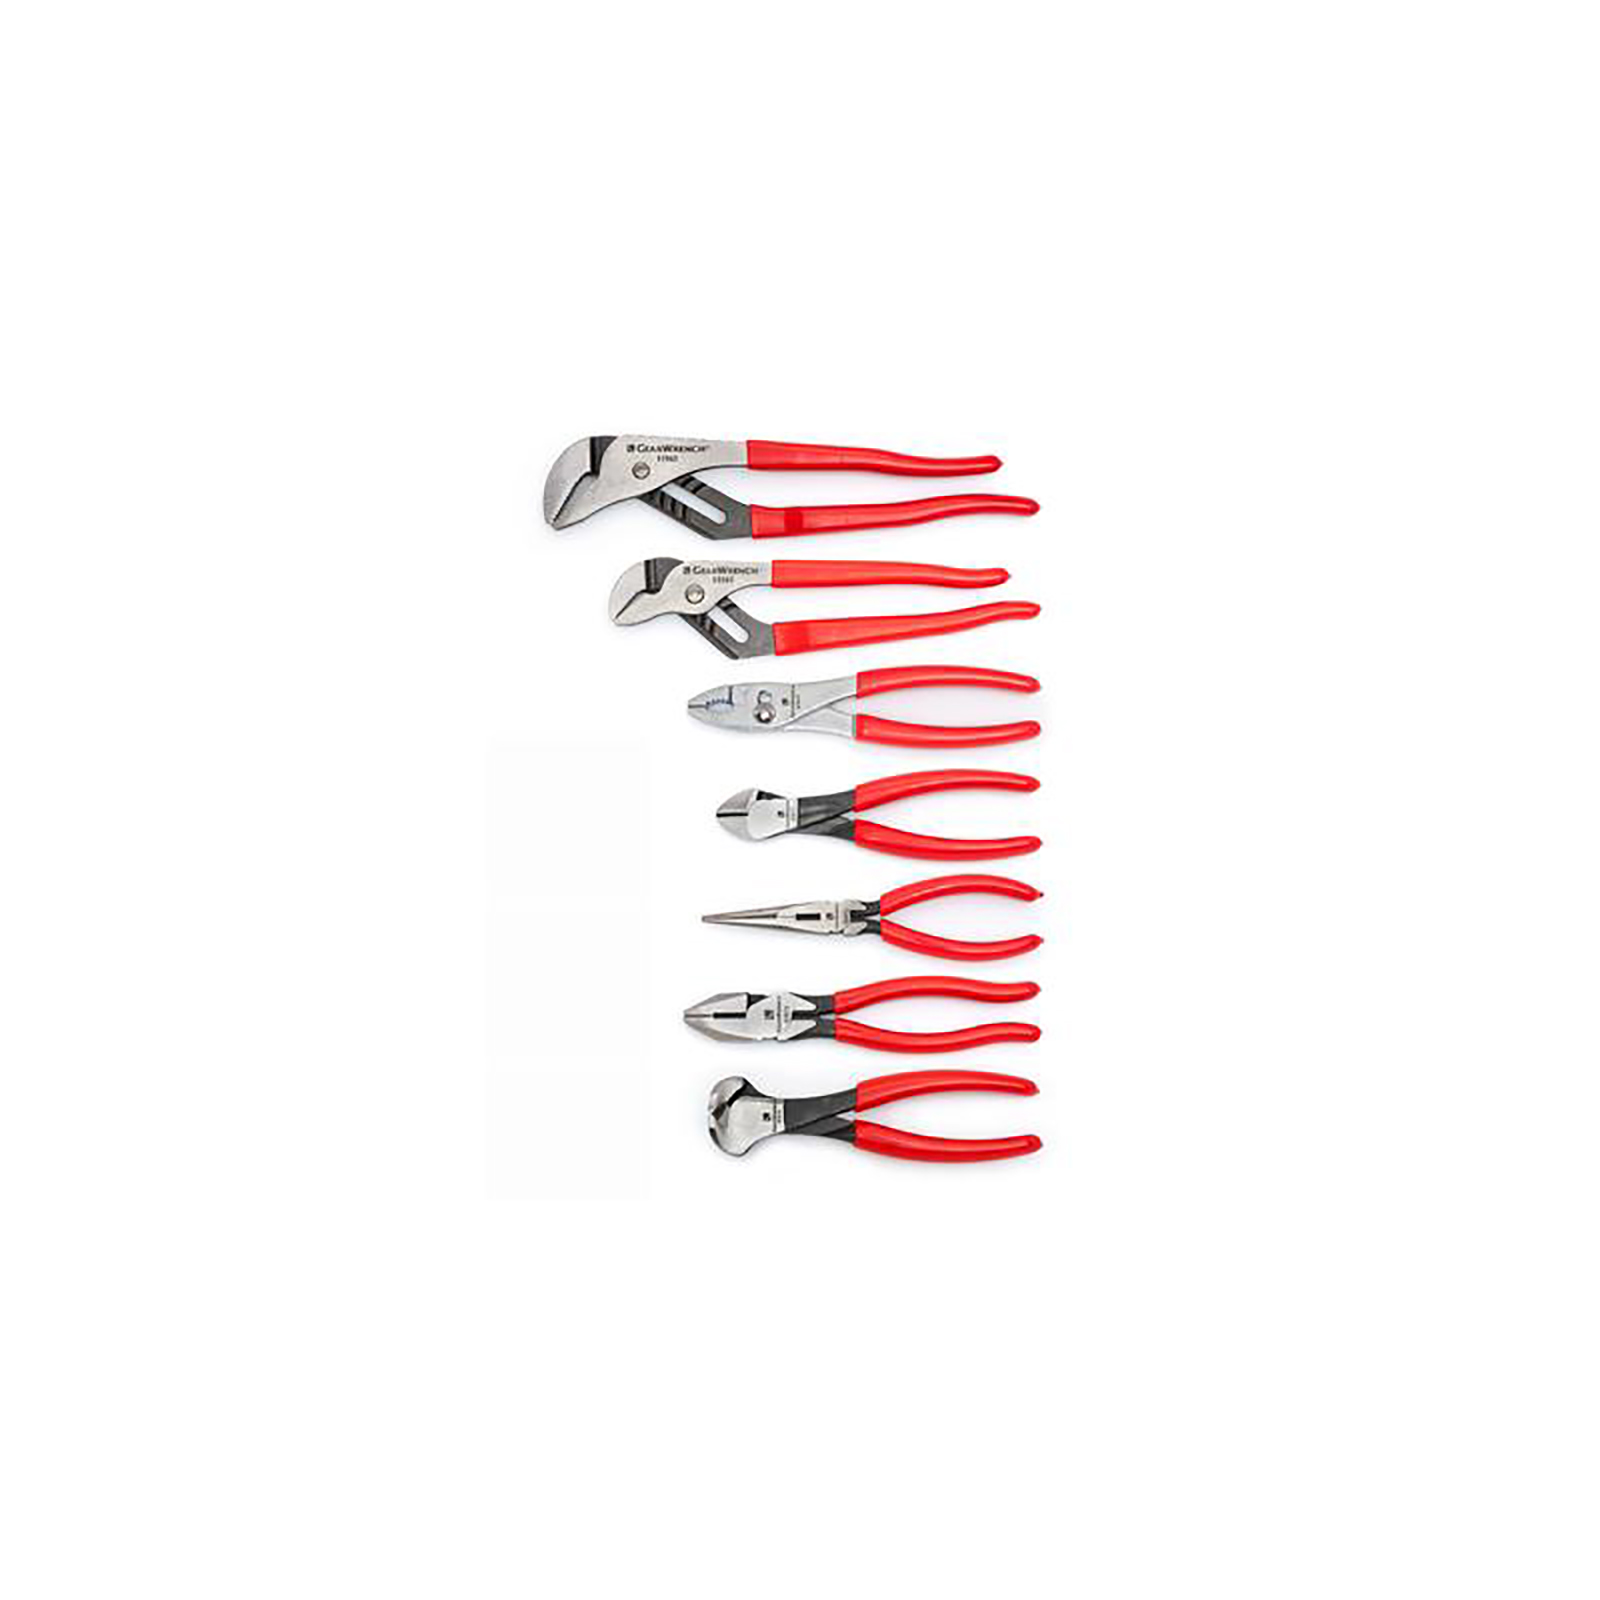 GearWrench 7pc. Mixed Dipped Handle Plier Set